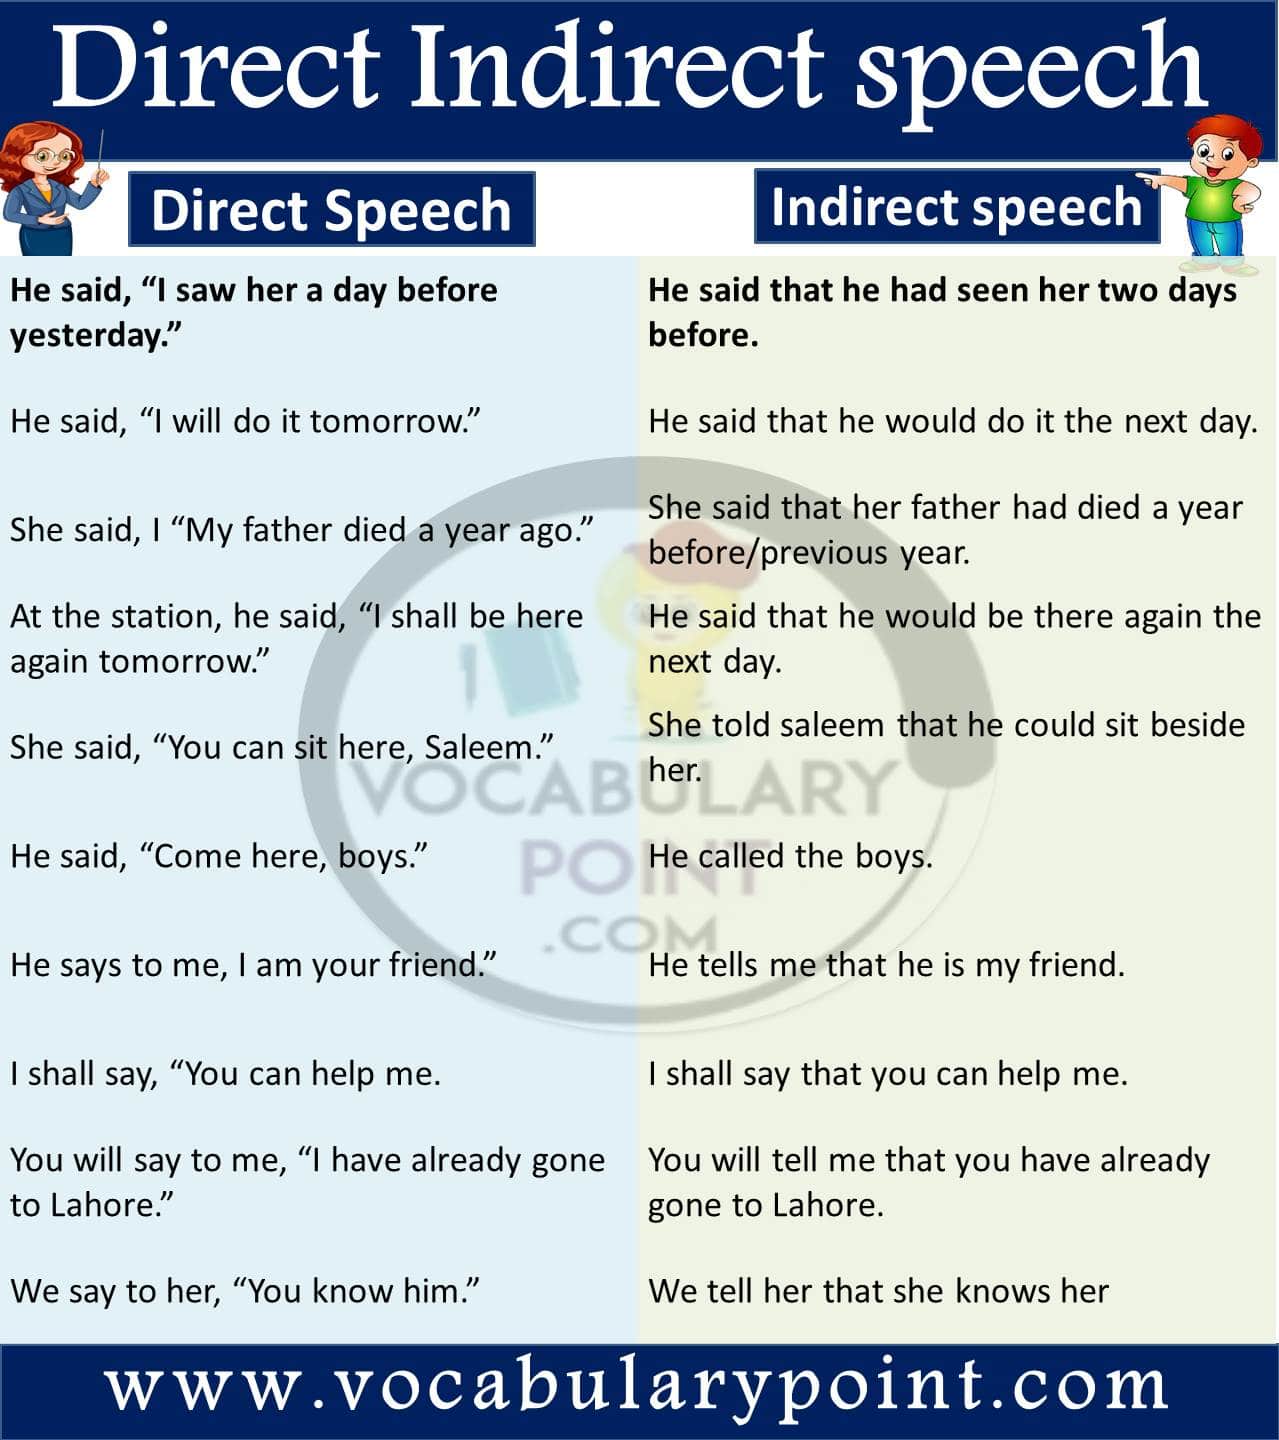 Direct Indirect speech| 50+examples of direct and indirect speech pdf